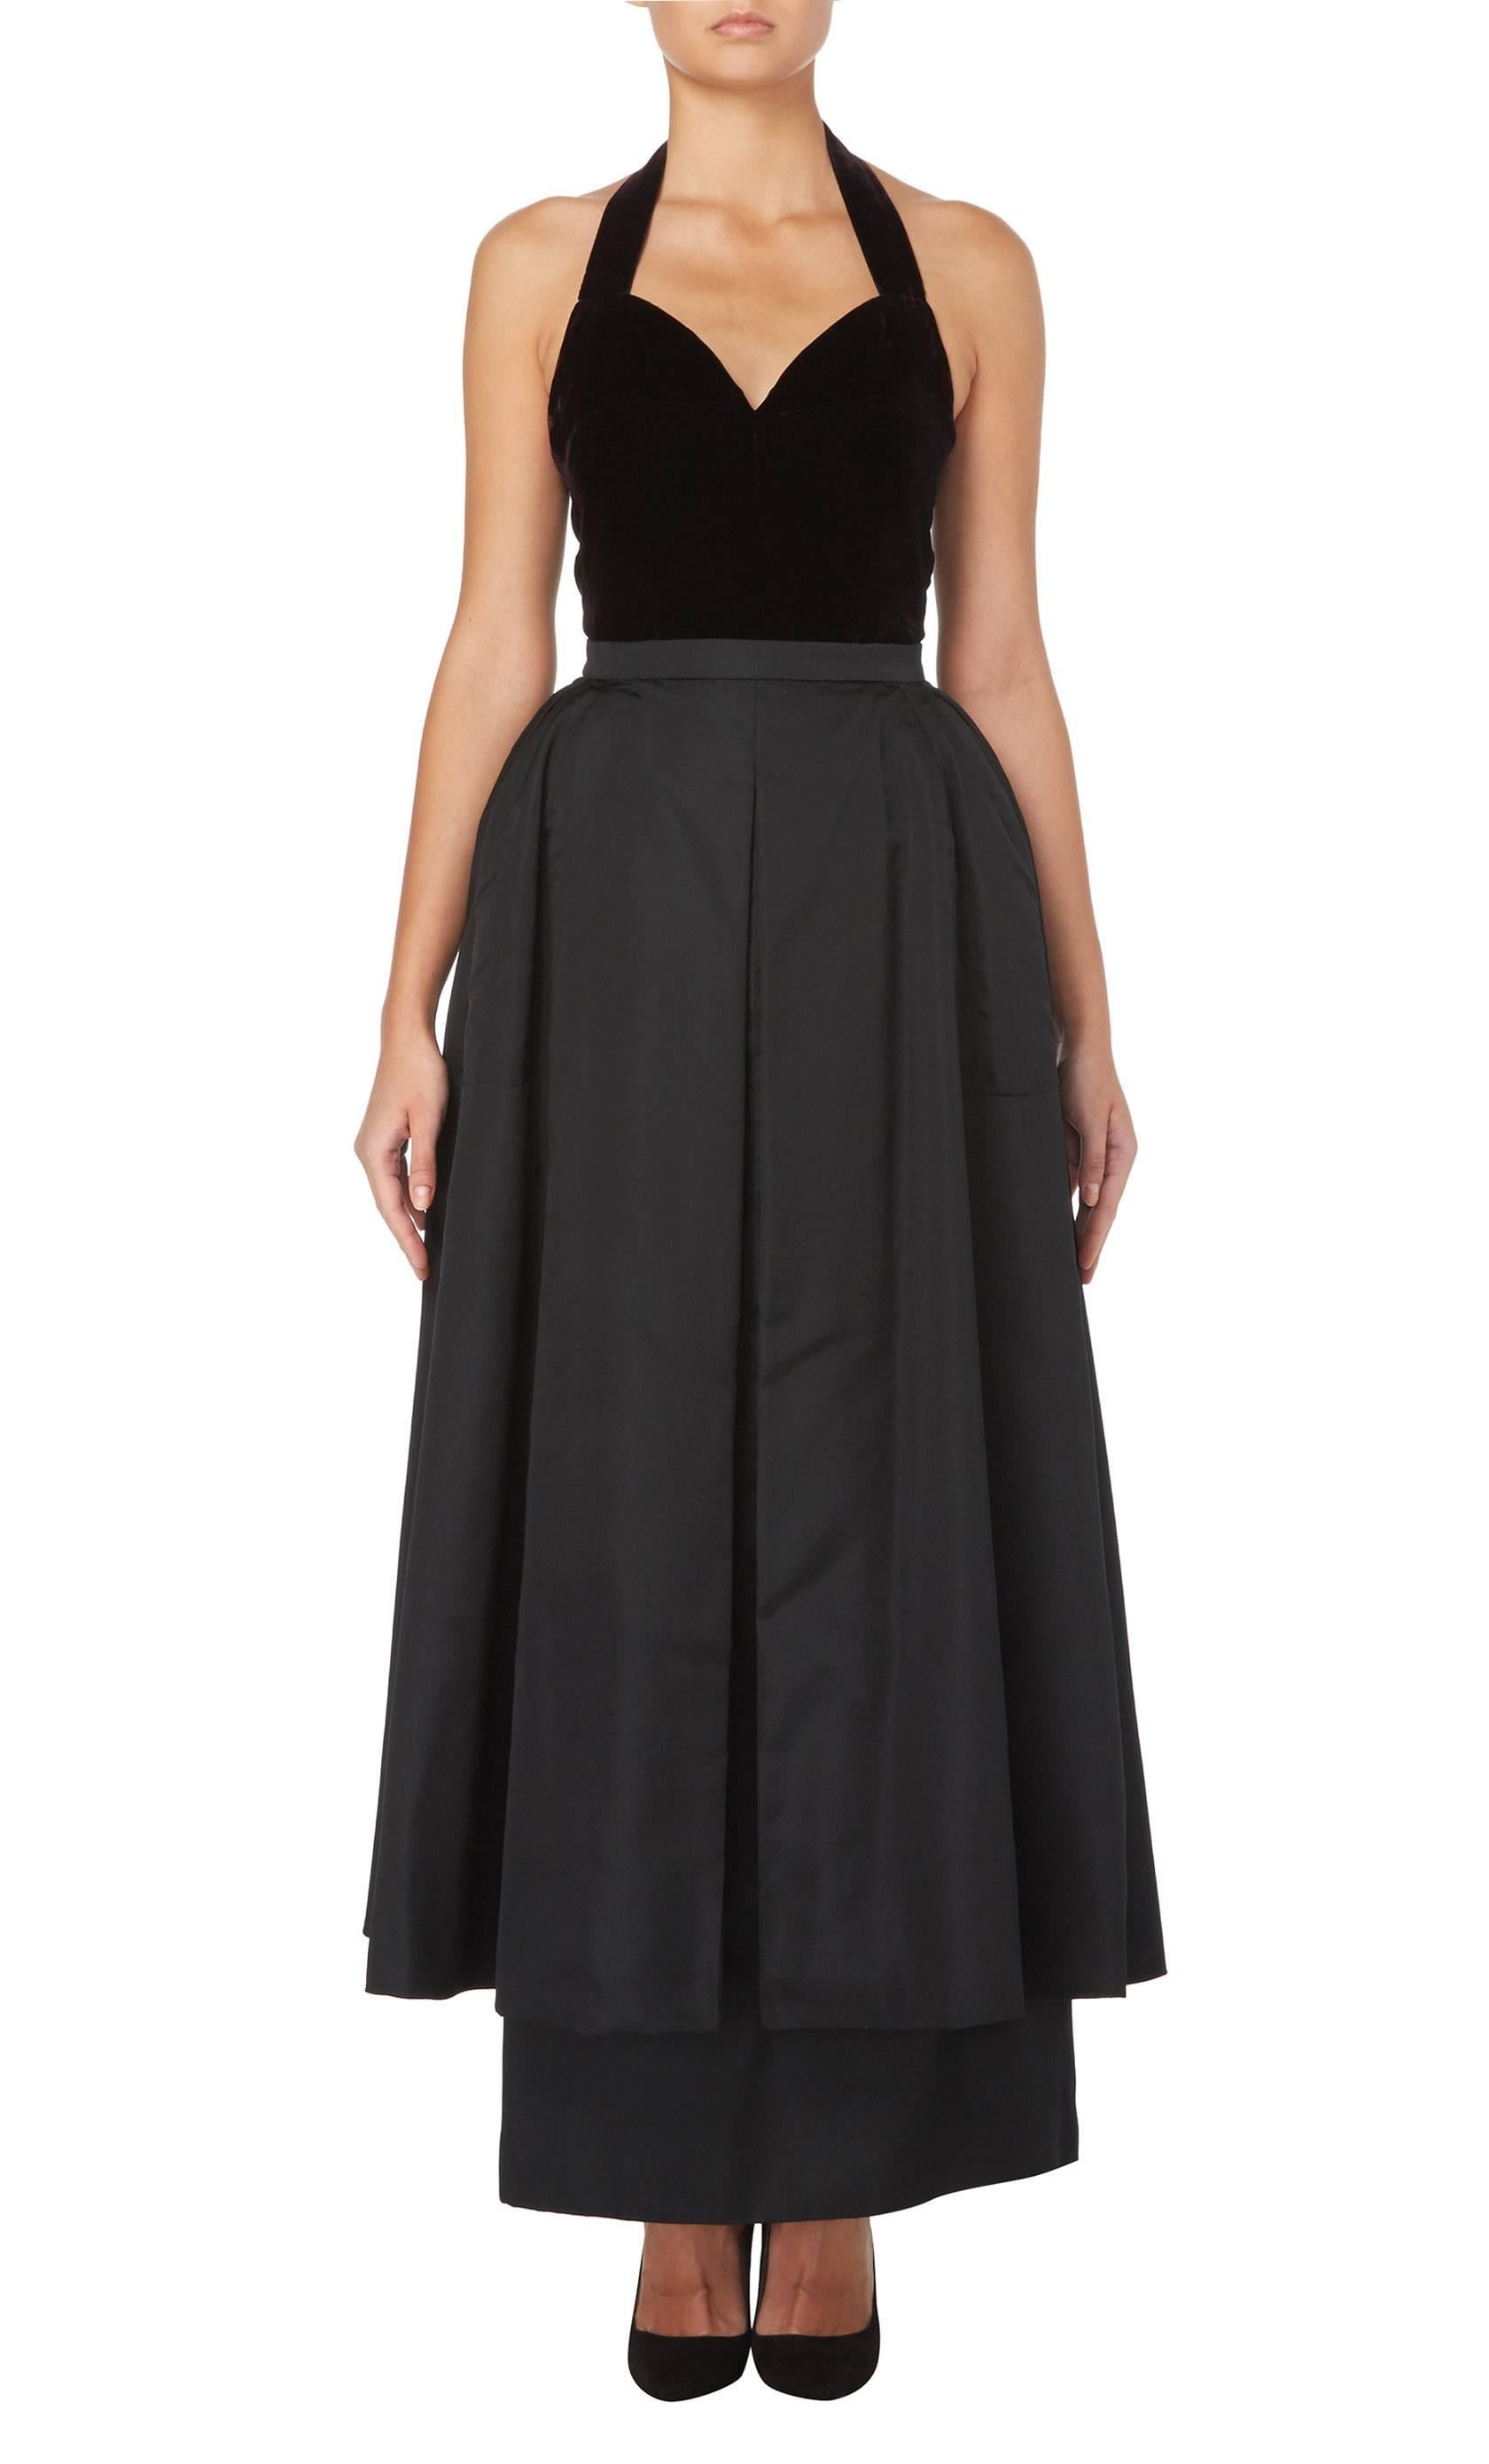 This utterly chic two-piece evening ensemble consisting of a velvet halter neck top and satin skirt is perfect for red carpet events. The top features a sweetheart neckline and fastens at the back of the neck with hook and eyes. The skirt has two